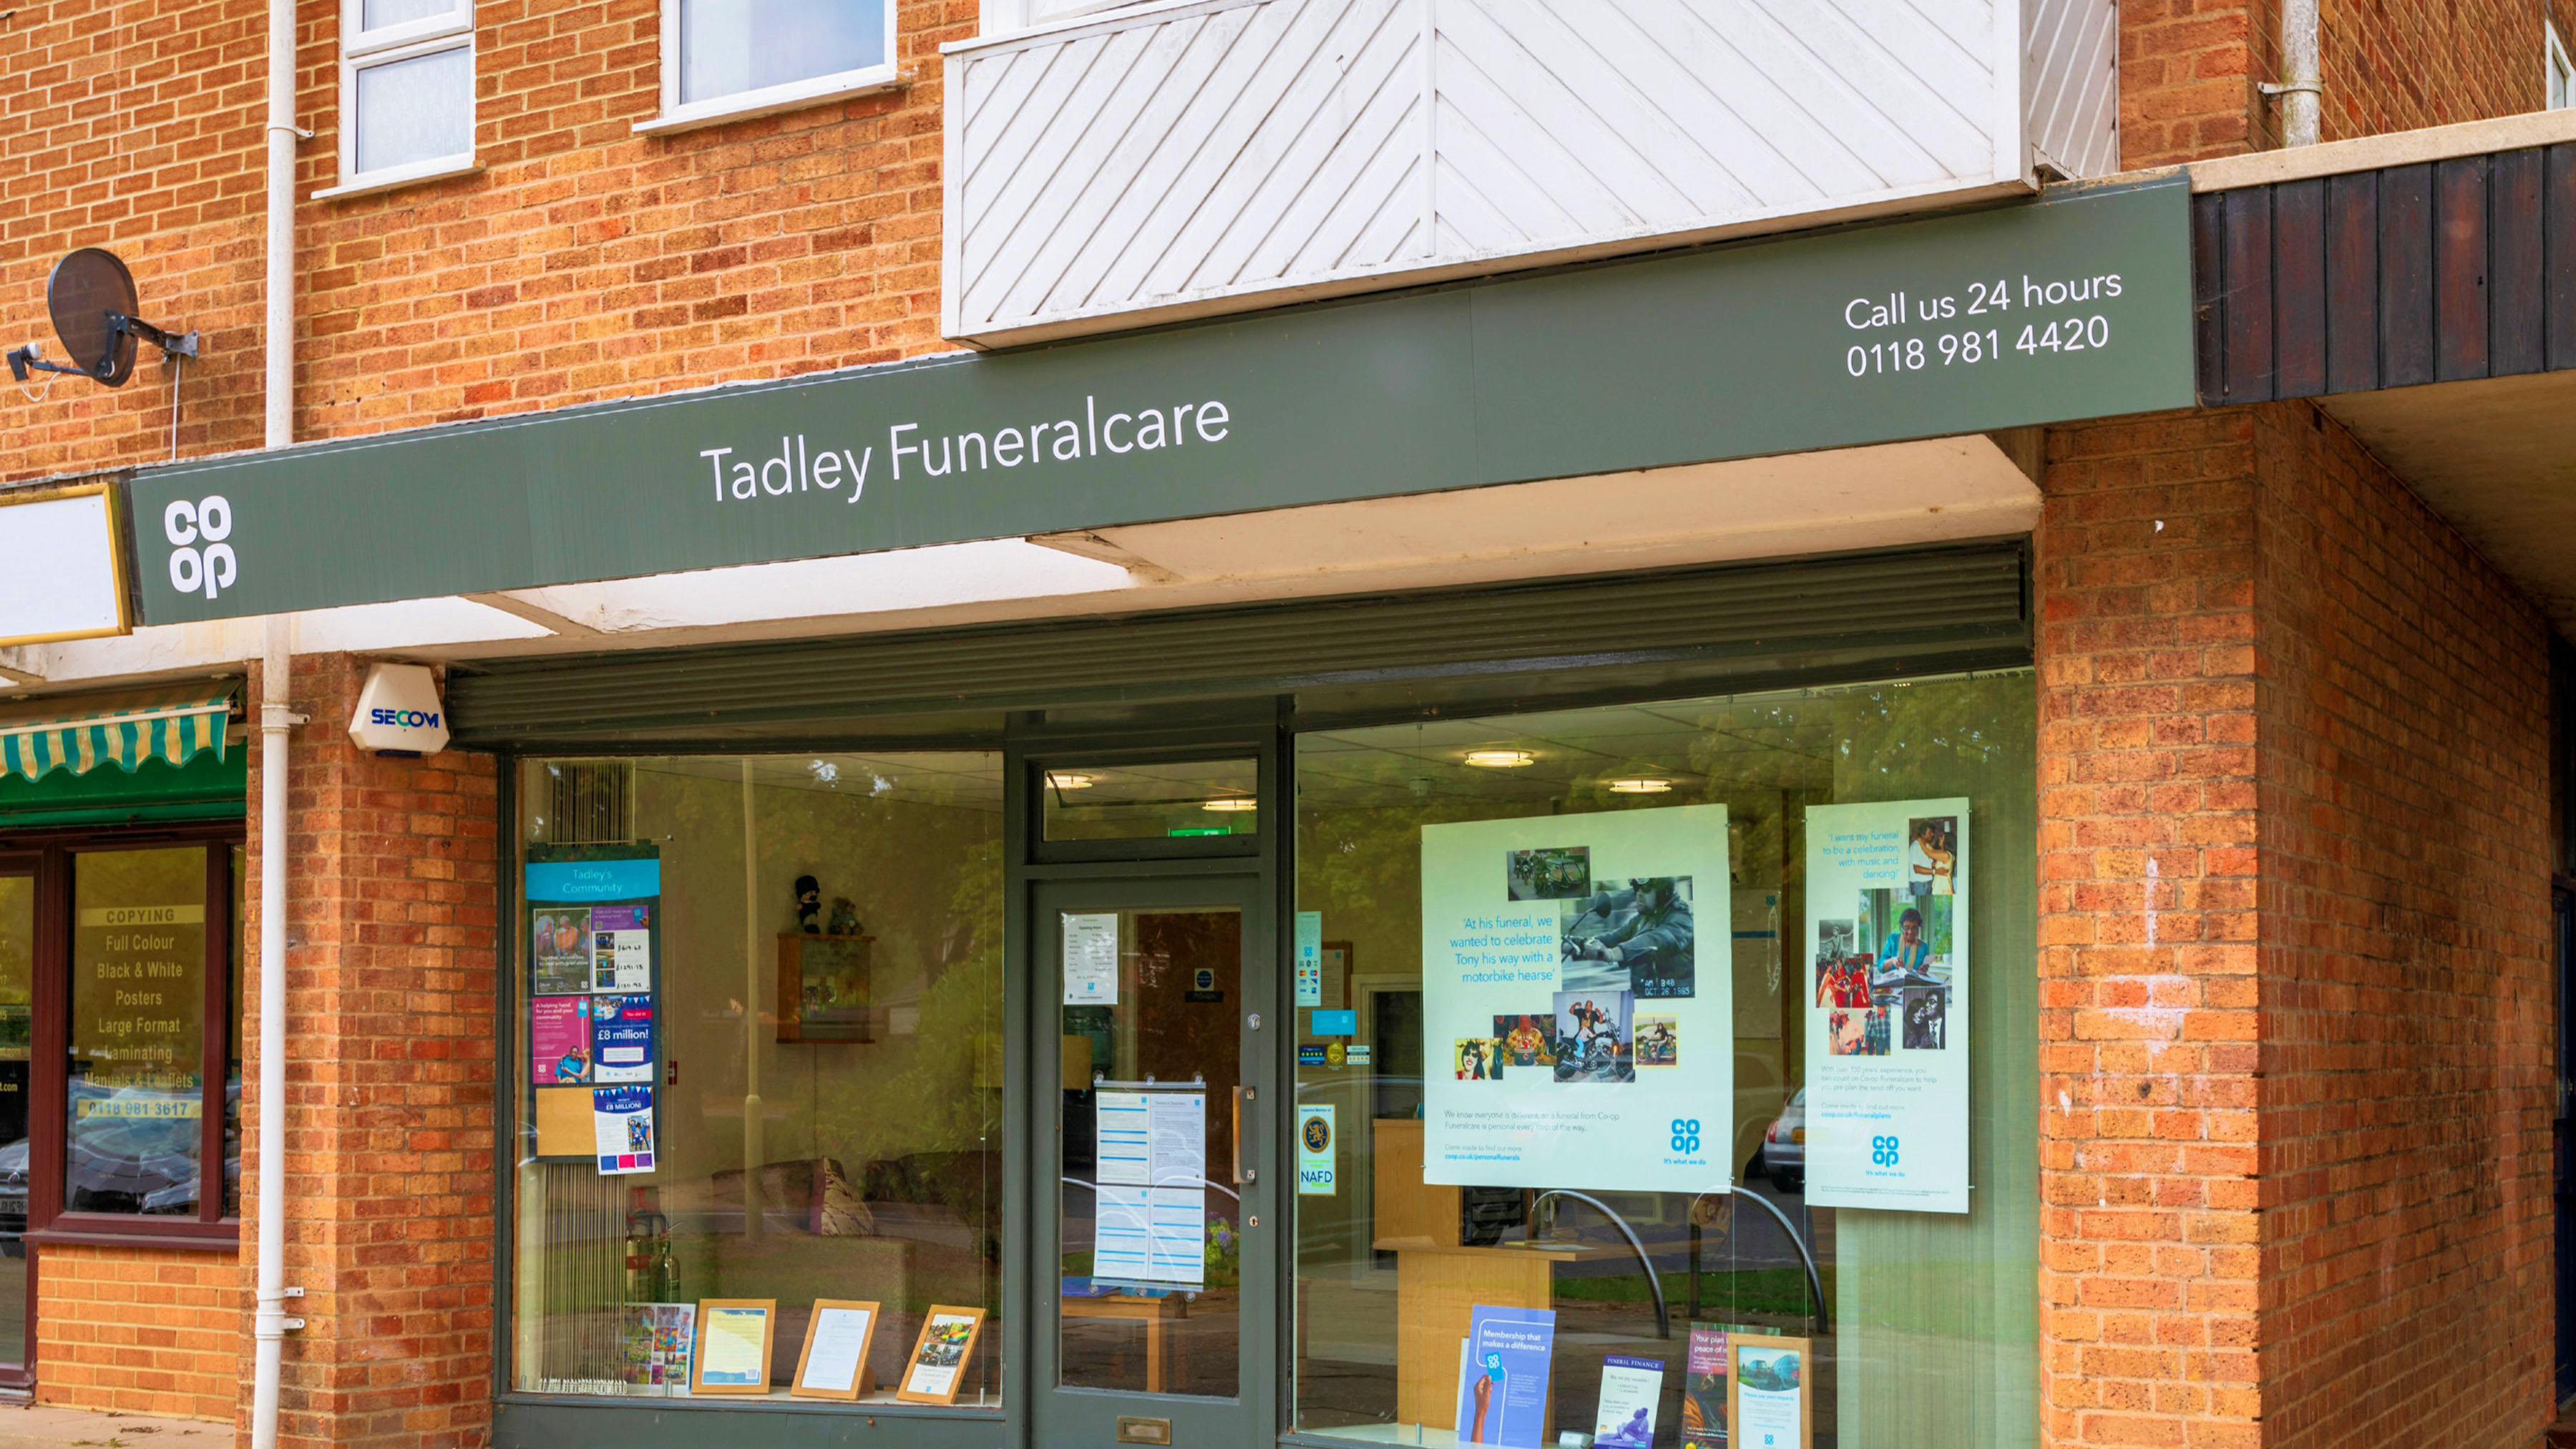 Images Tadley Funeralcare